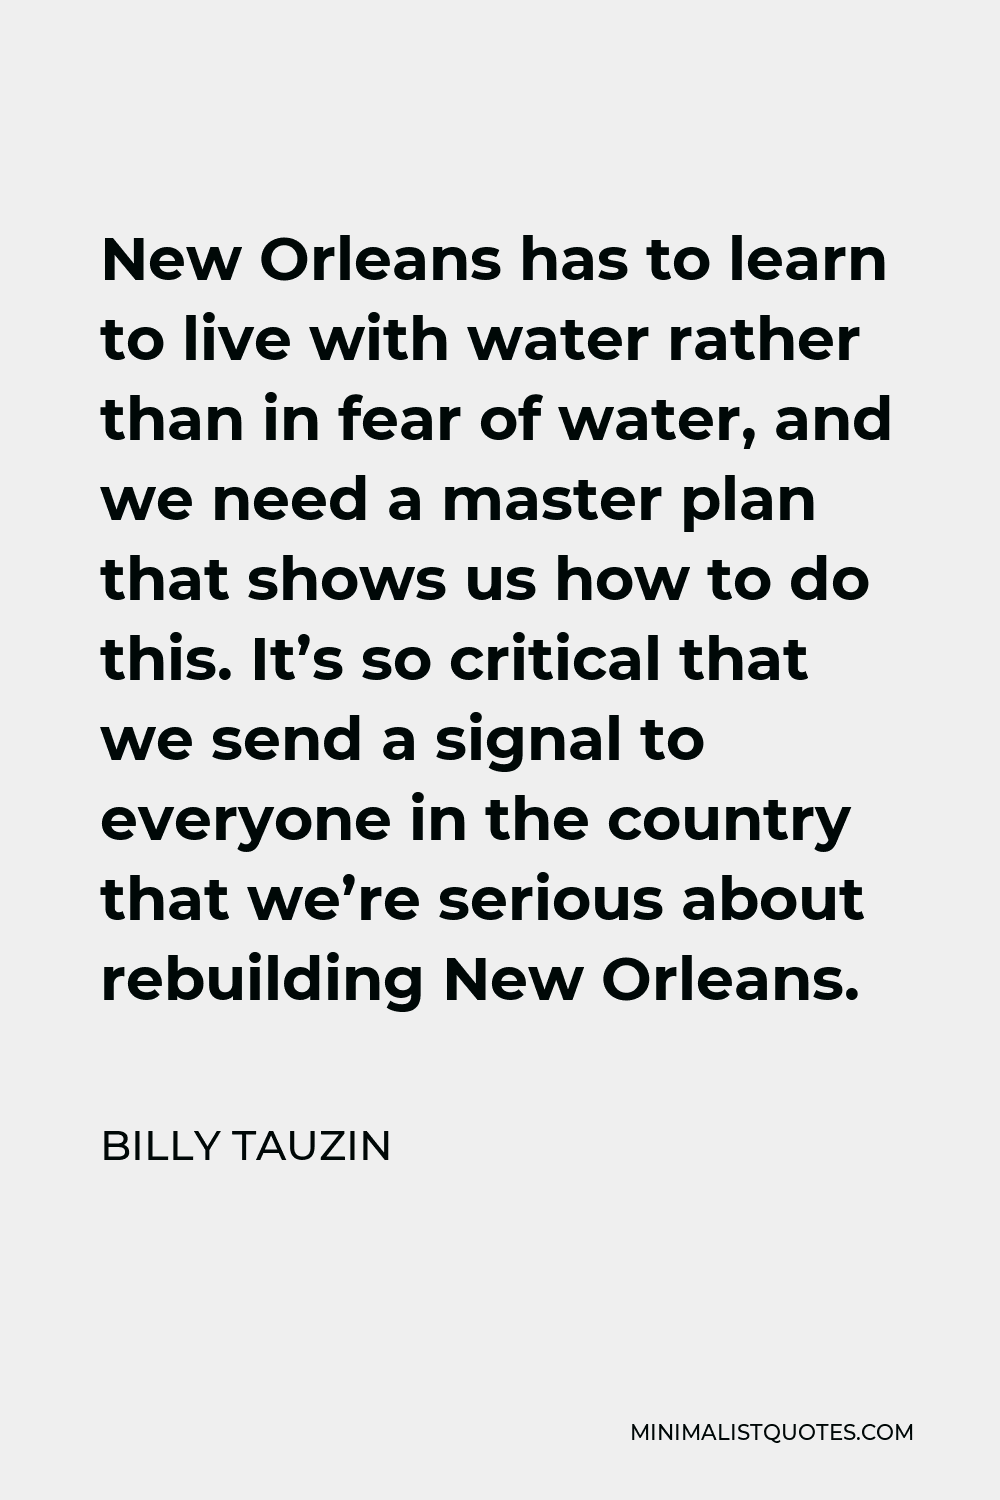 Billy Tauzin Quote - New Orleans has to learn to live with water rather than in fear of water, and we need a master plan that shows us how to do this. It’s so critical that we send a signal to everyone in the country that we’re serious about rebuilding New Orleans.